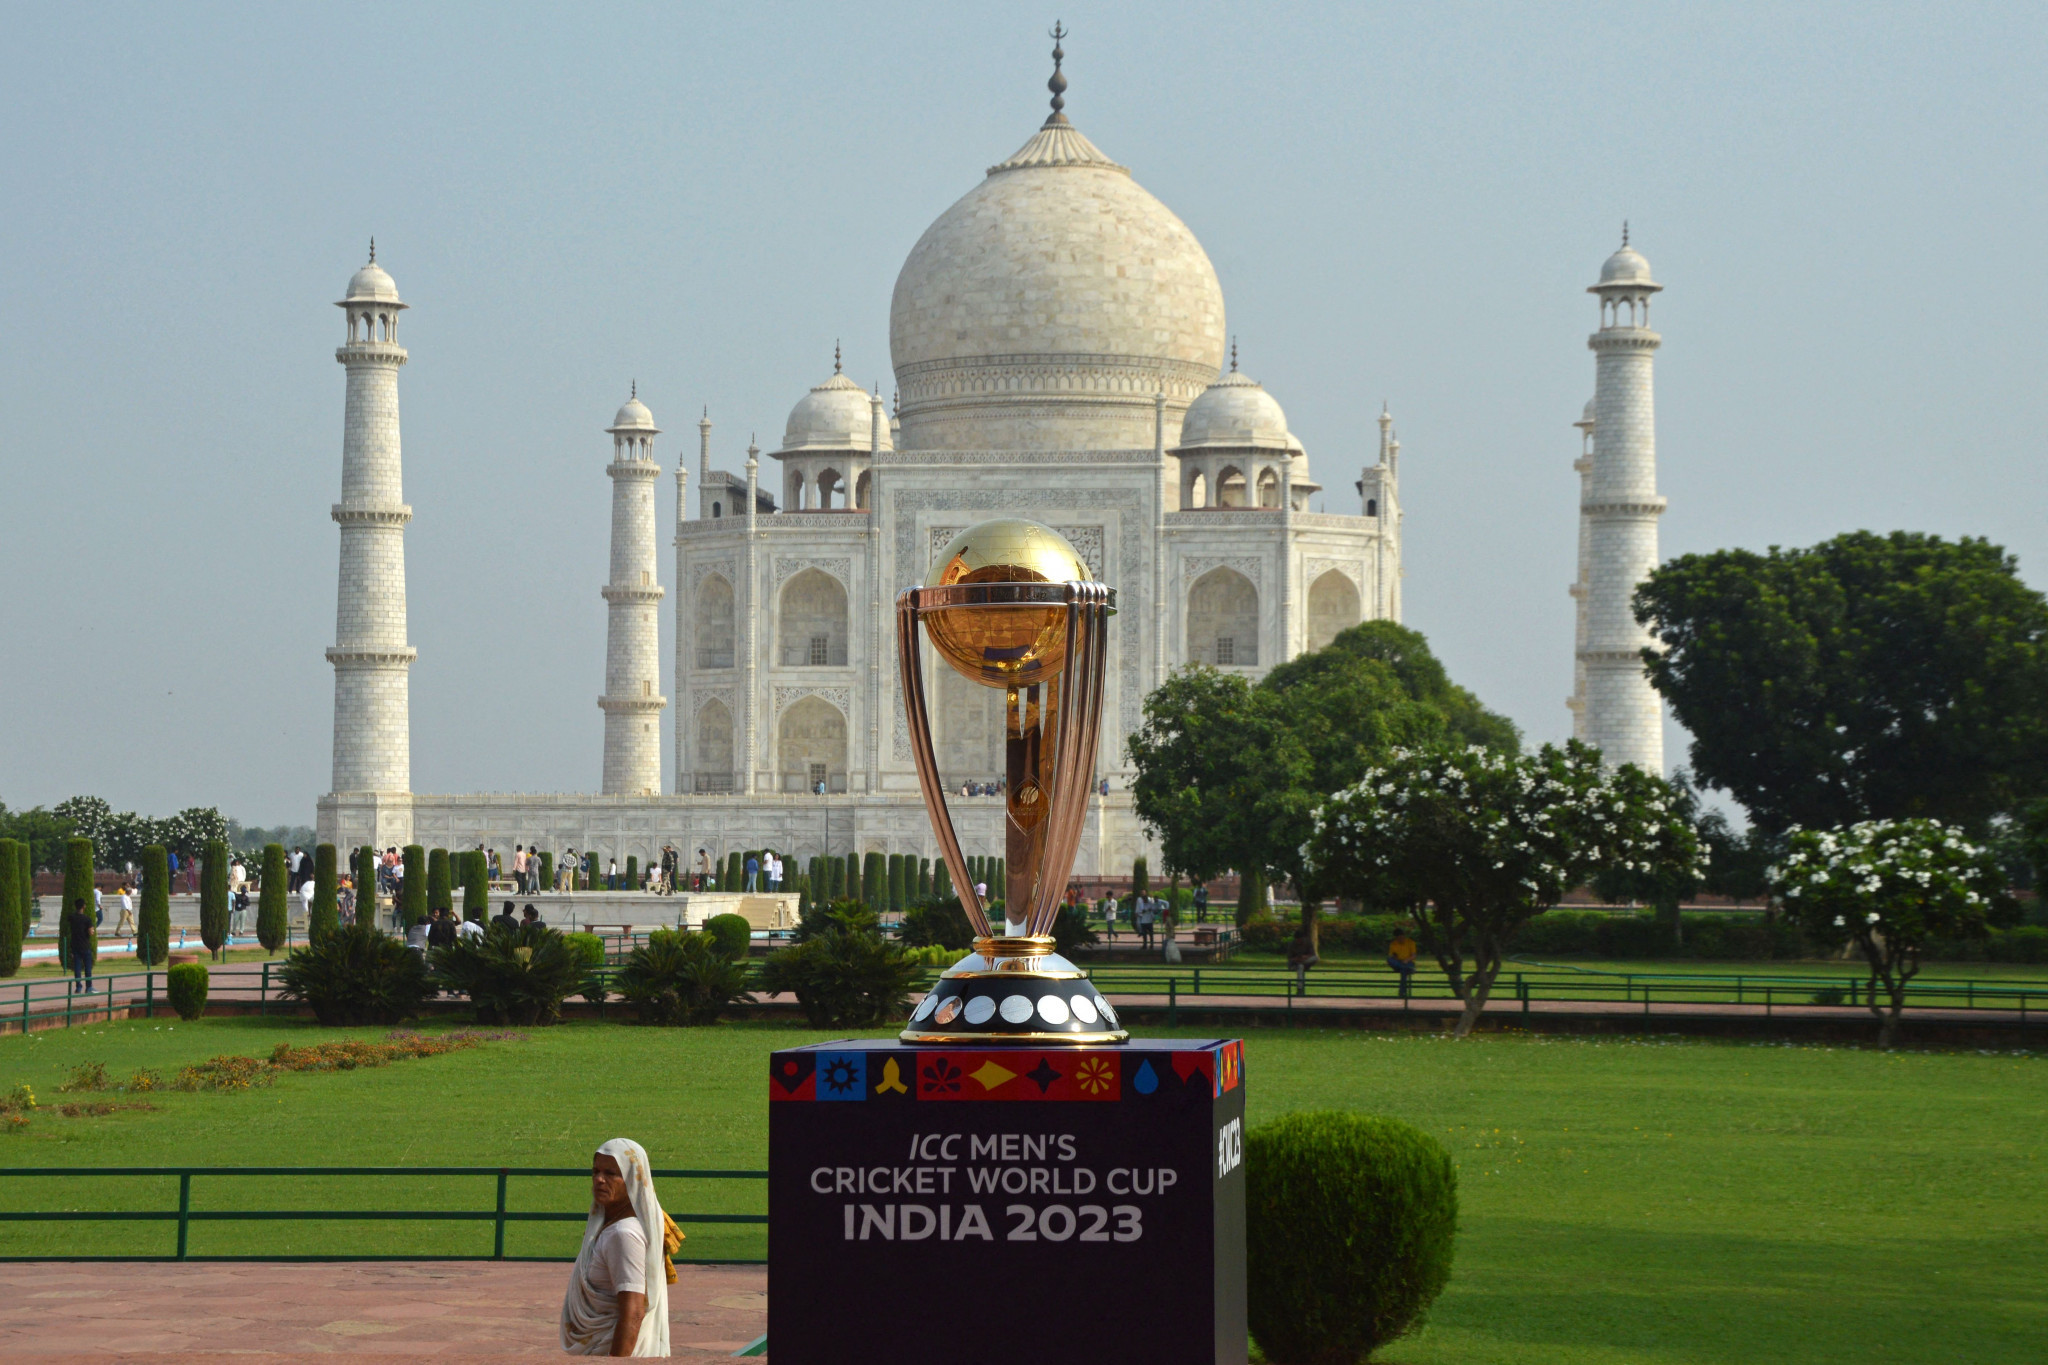 The ICC say they are confident that the 2023 Men's Cricket World Cup in India will help further the sport's growth ©Getty Images